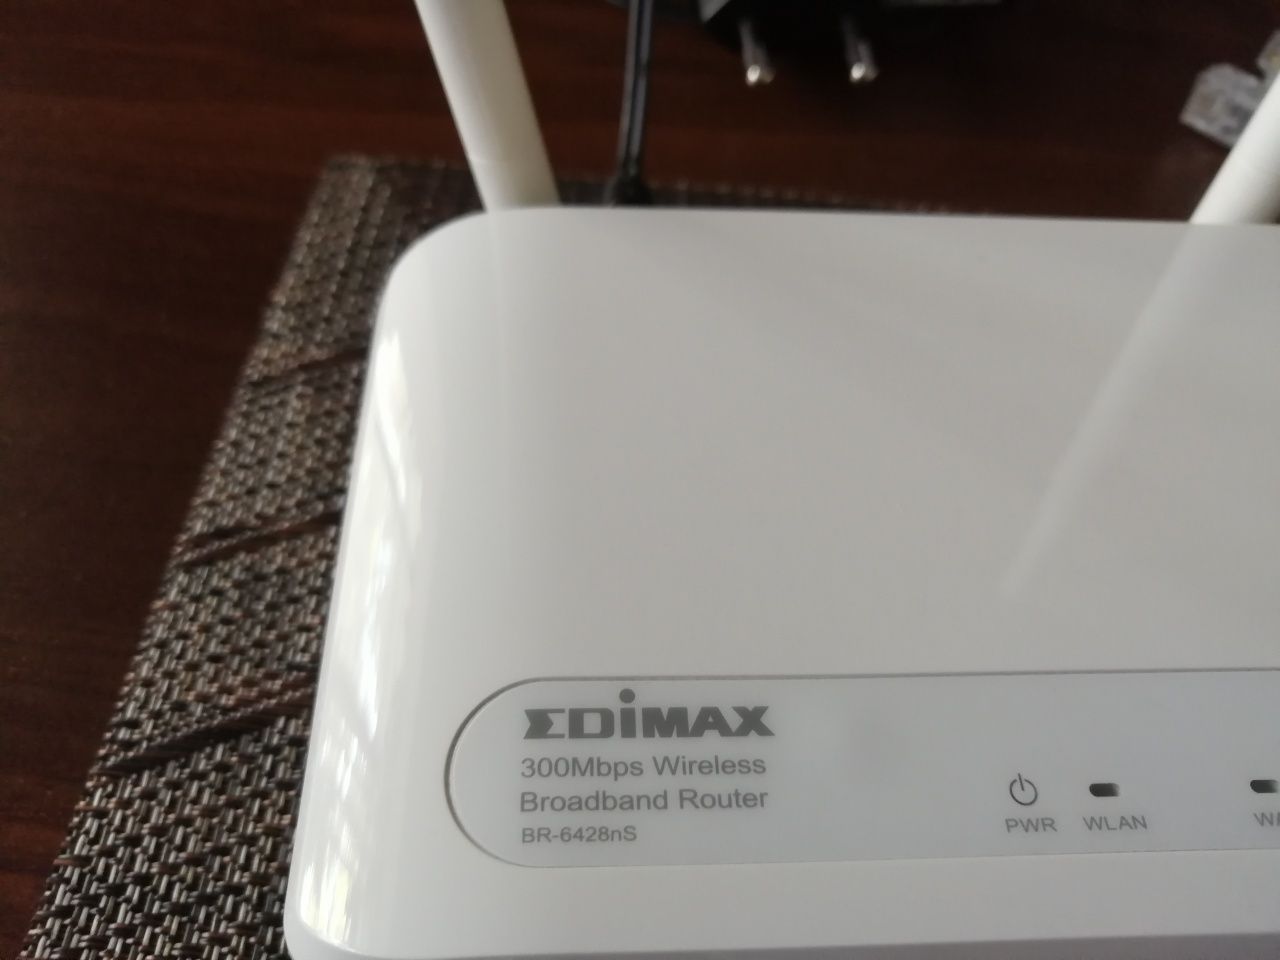 Router wireless Edimax 300Mbps